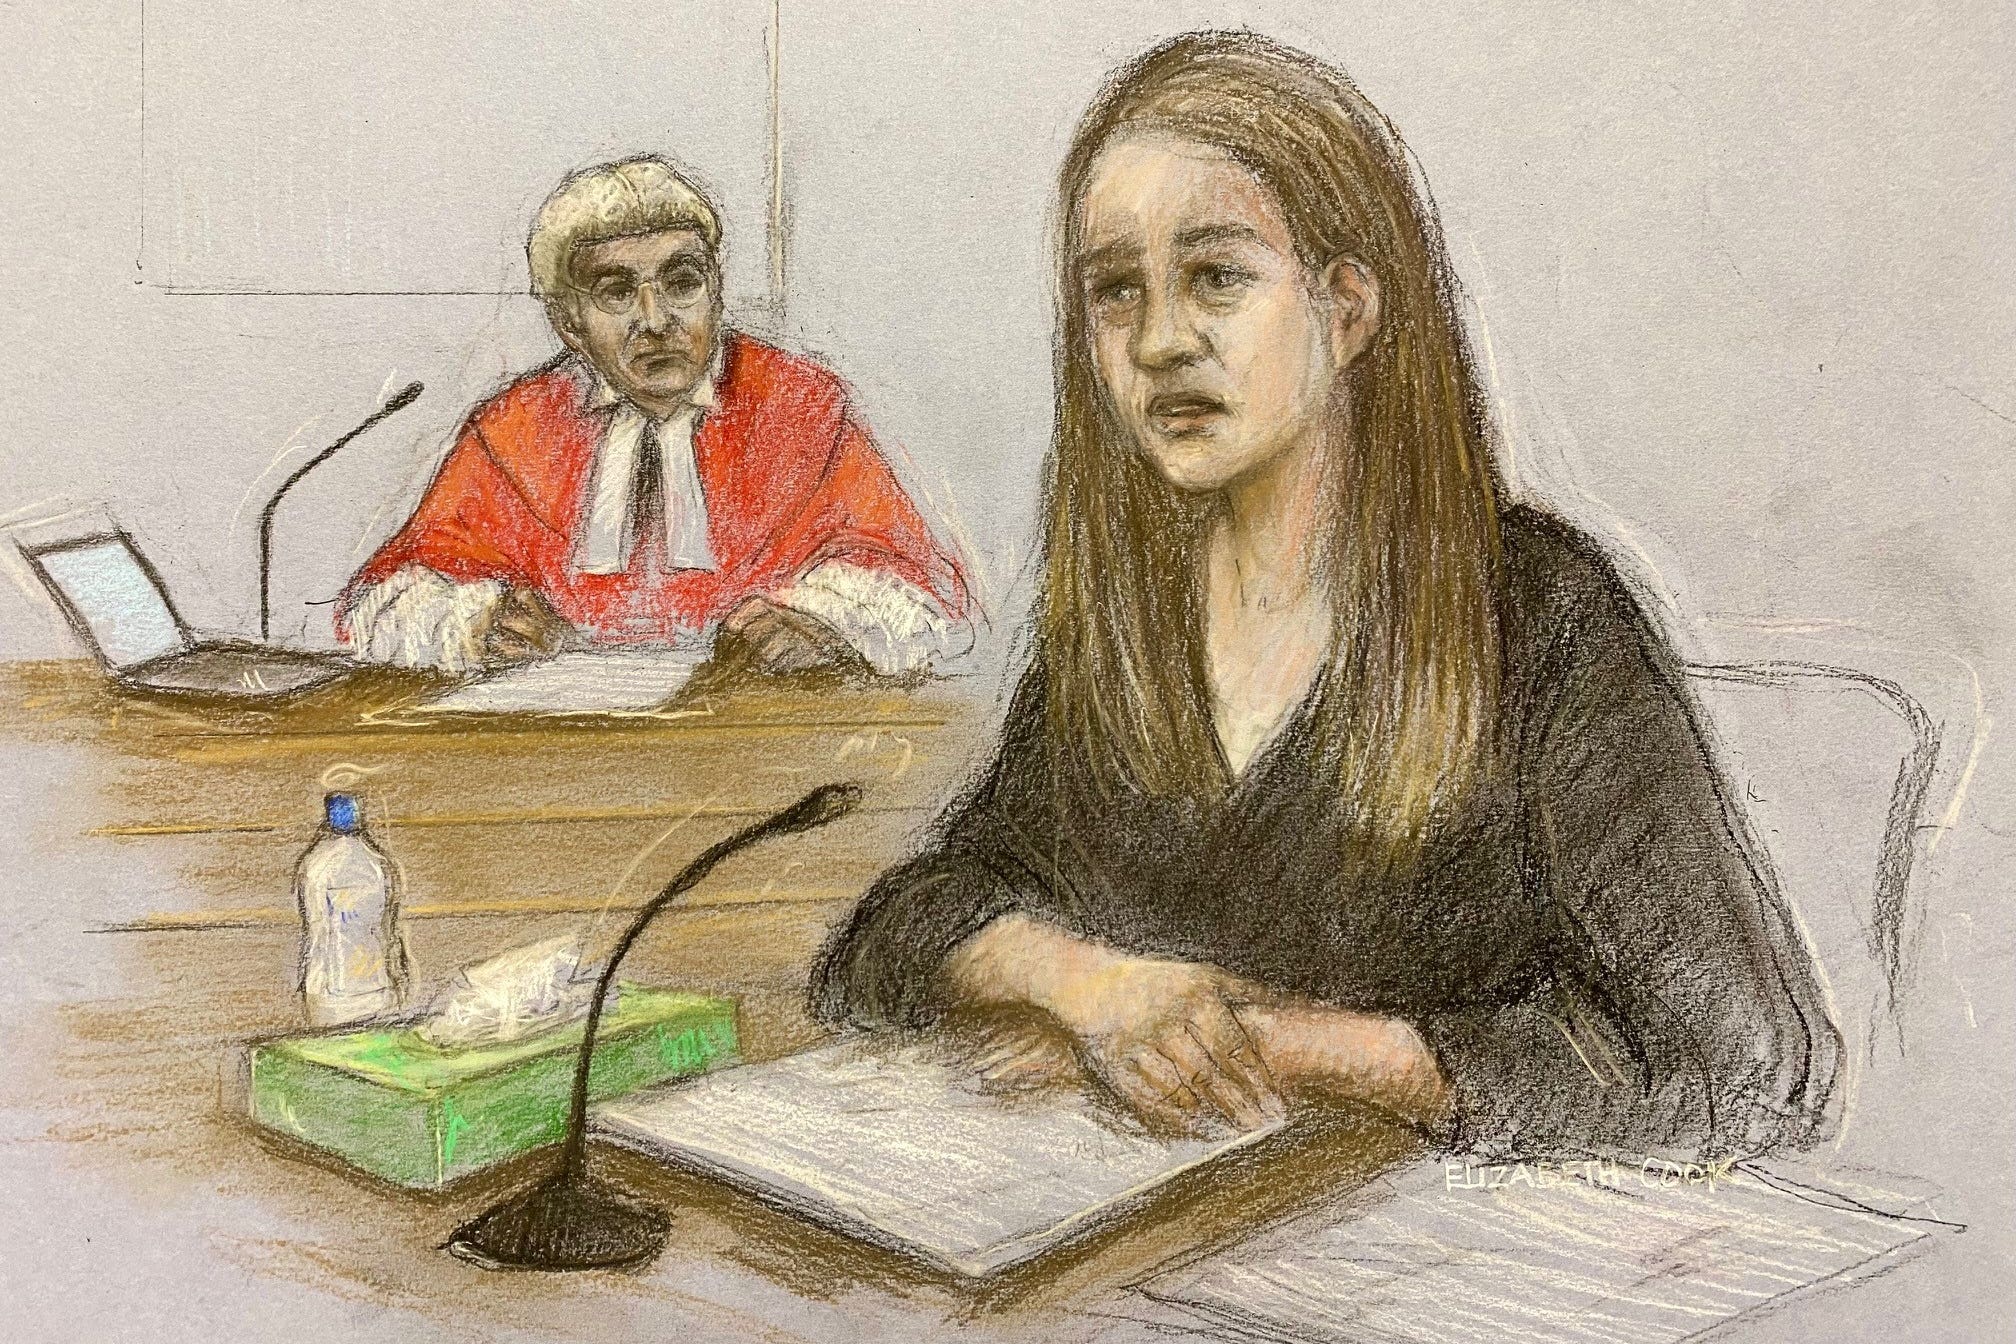 The 33-year-old was found guilty on Friday of murdering seven infants and attempting to murder six others when she was working on the neonatal unit at the Countess of Chester Hospital between June 2015 and June 2016